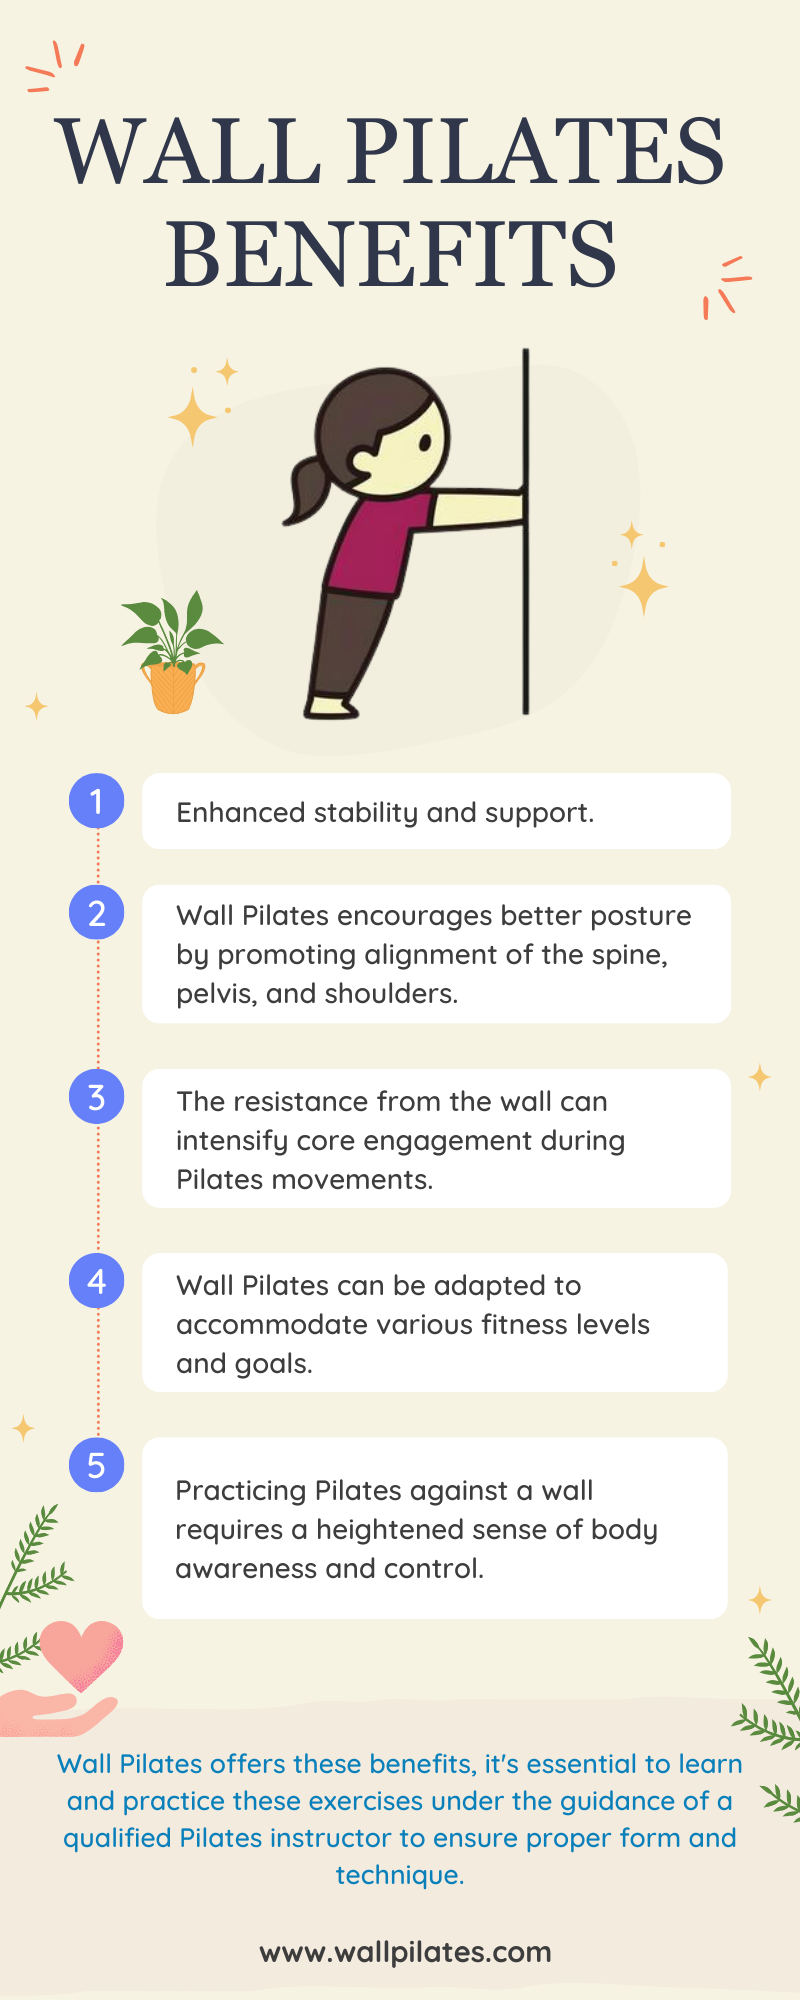 The Remarkable Health Benefits of Wall Pilates Exercise, by Wall Pilates